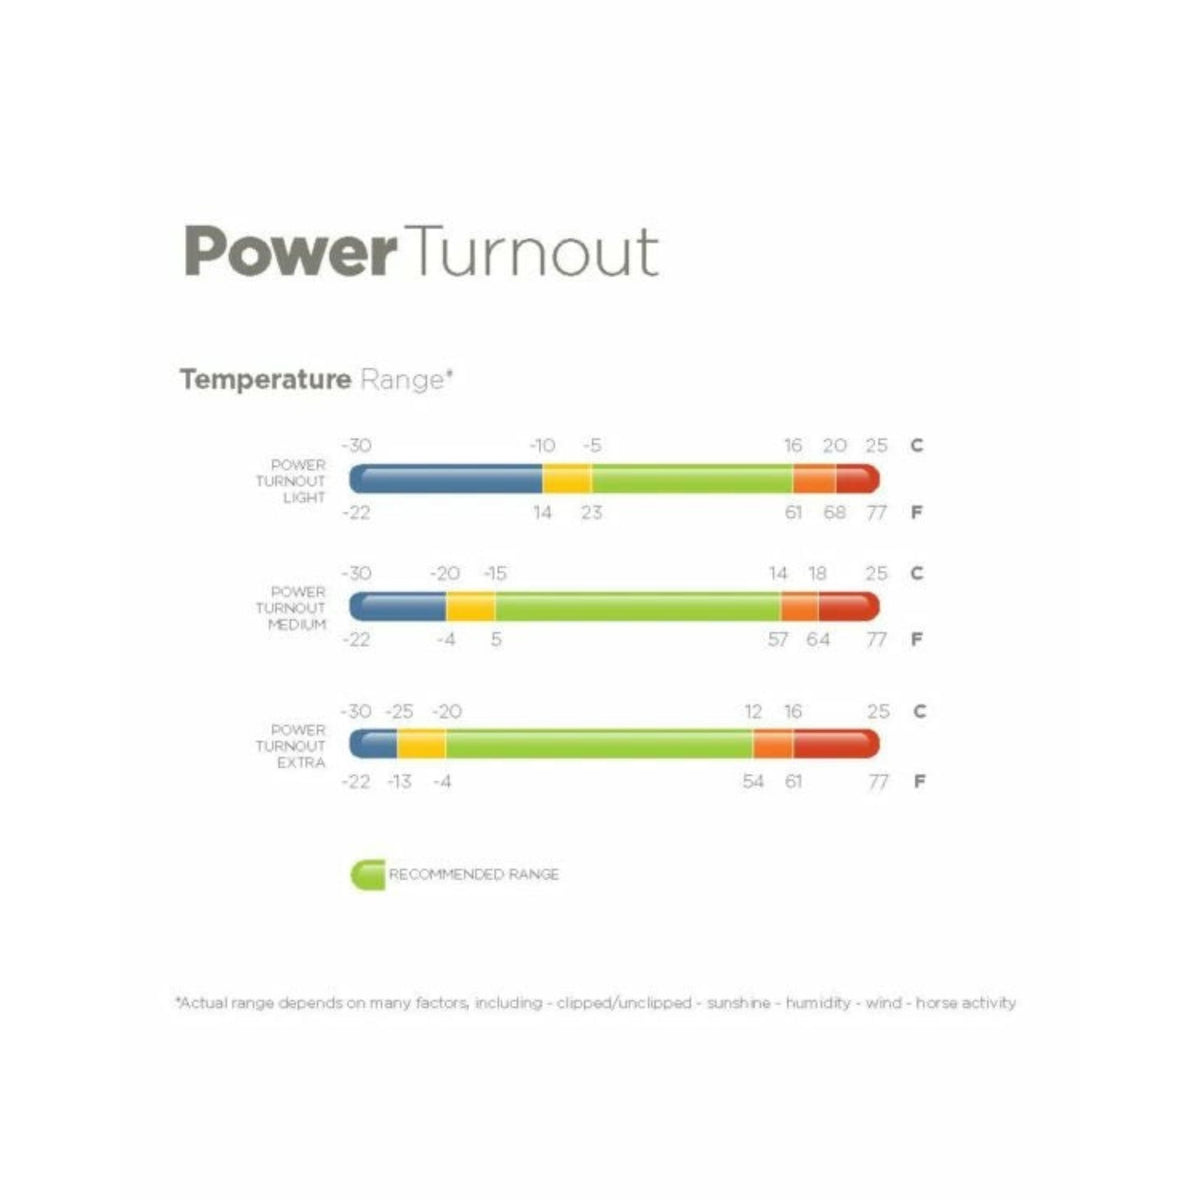 Power turnout temperature range poster with comparisons of different rugs.